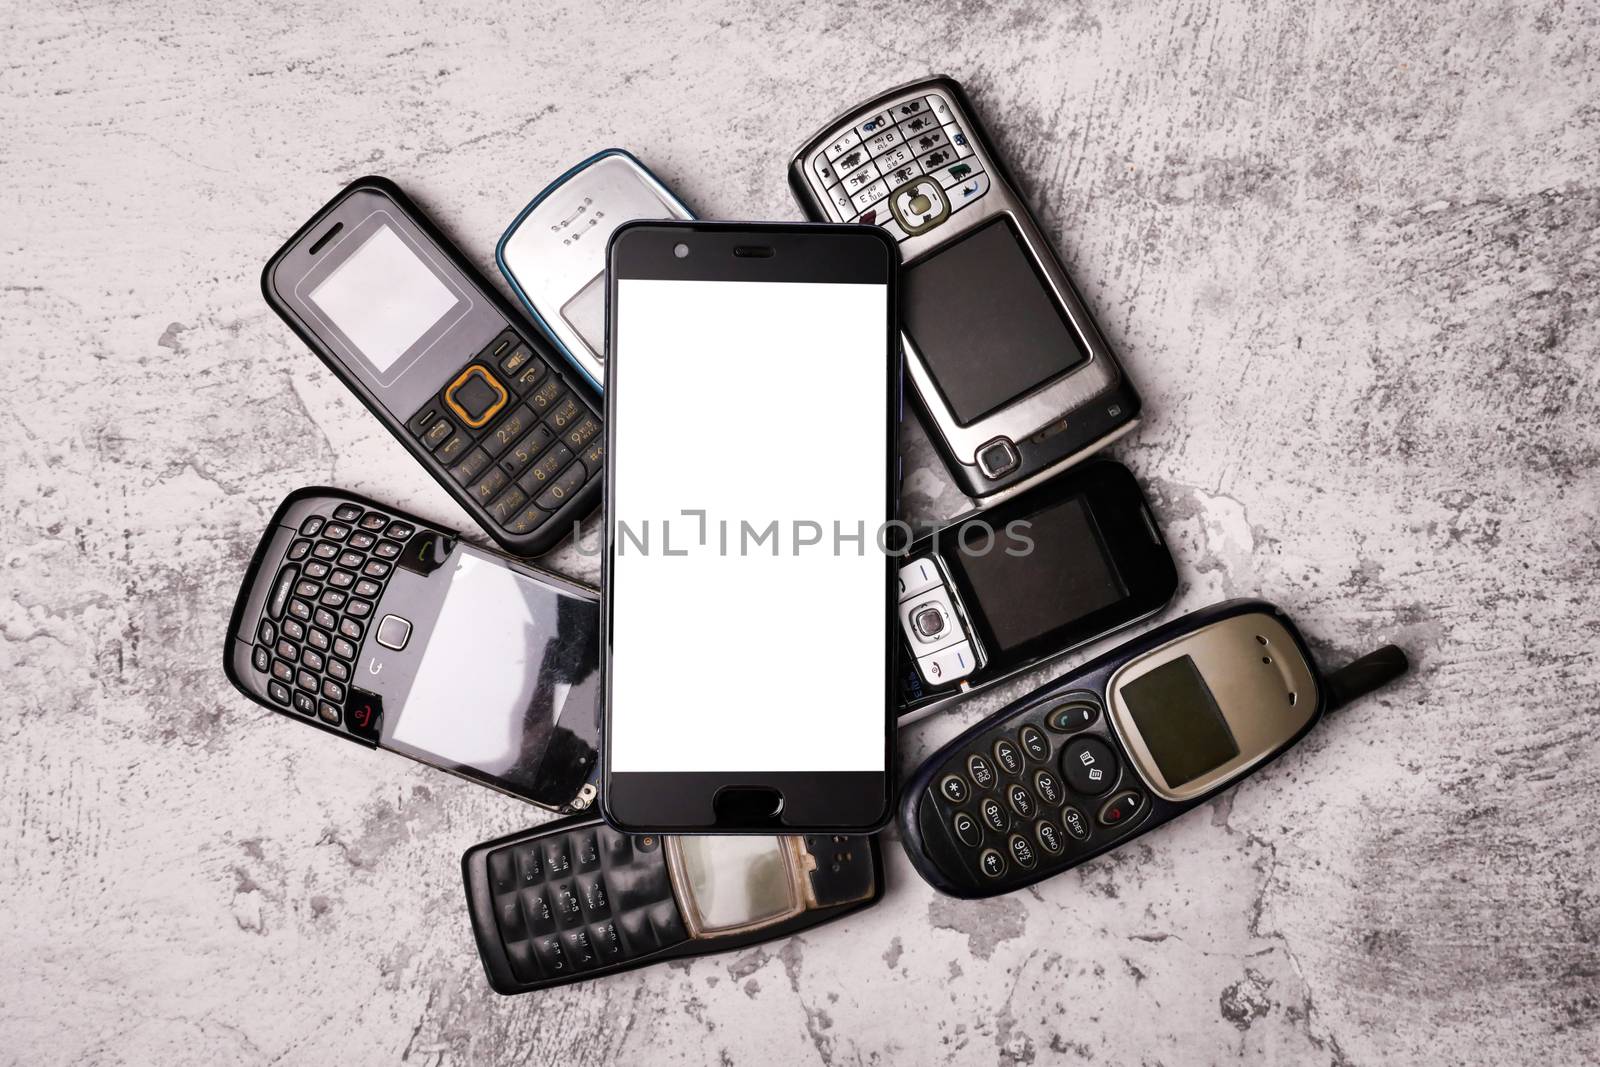 Many obsoleted cellphones and a smartphone on a grunge background.